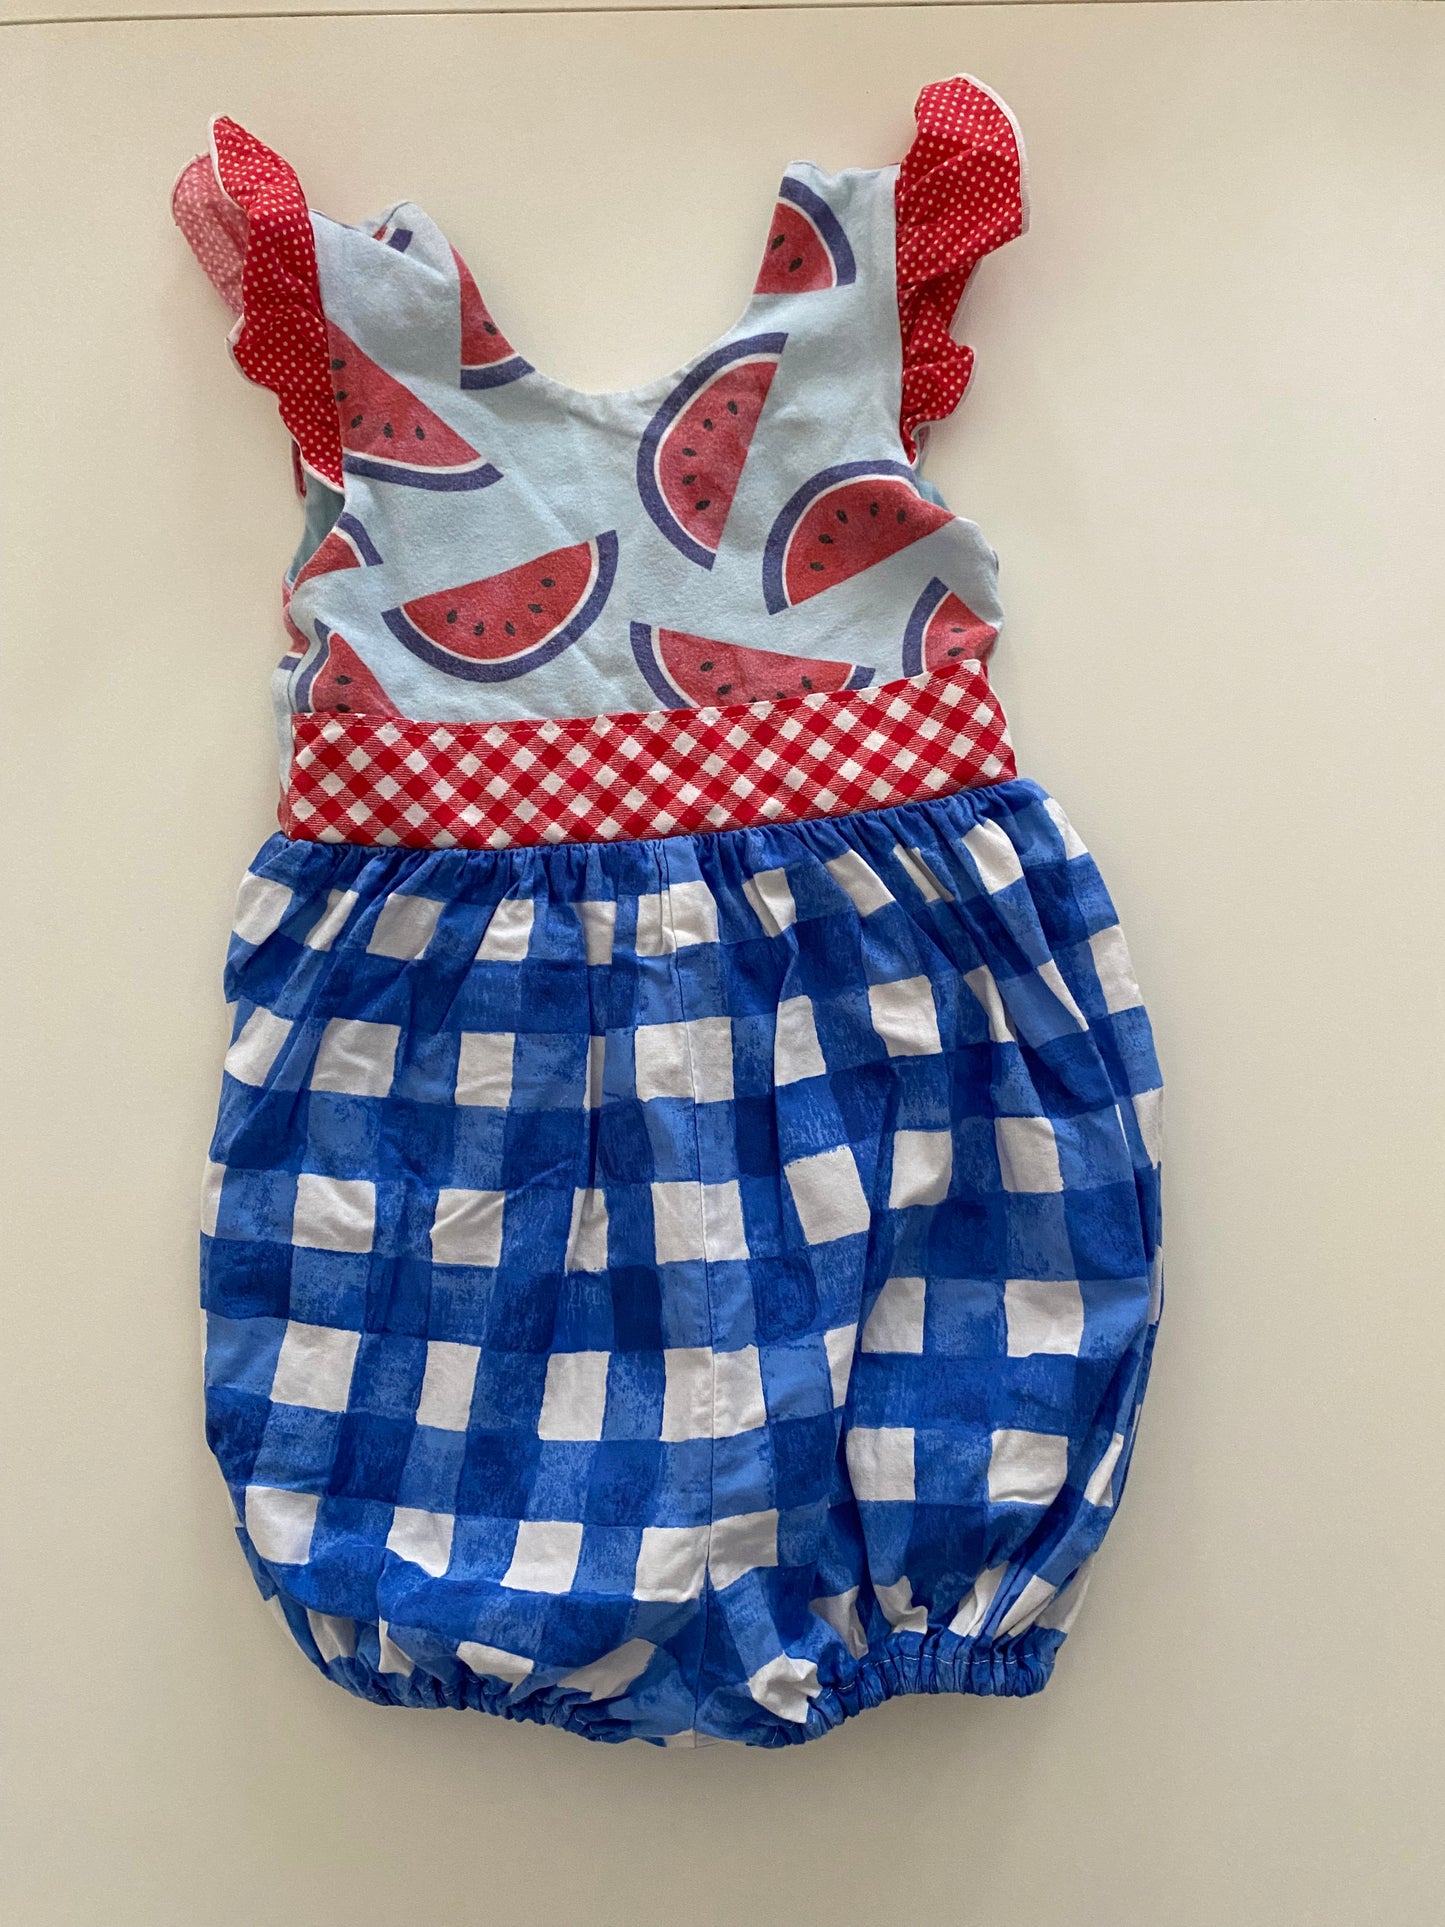 Baby Love ‘n More Watermelon and Blue Checker Print Bubble Romper Girls 2T